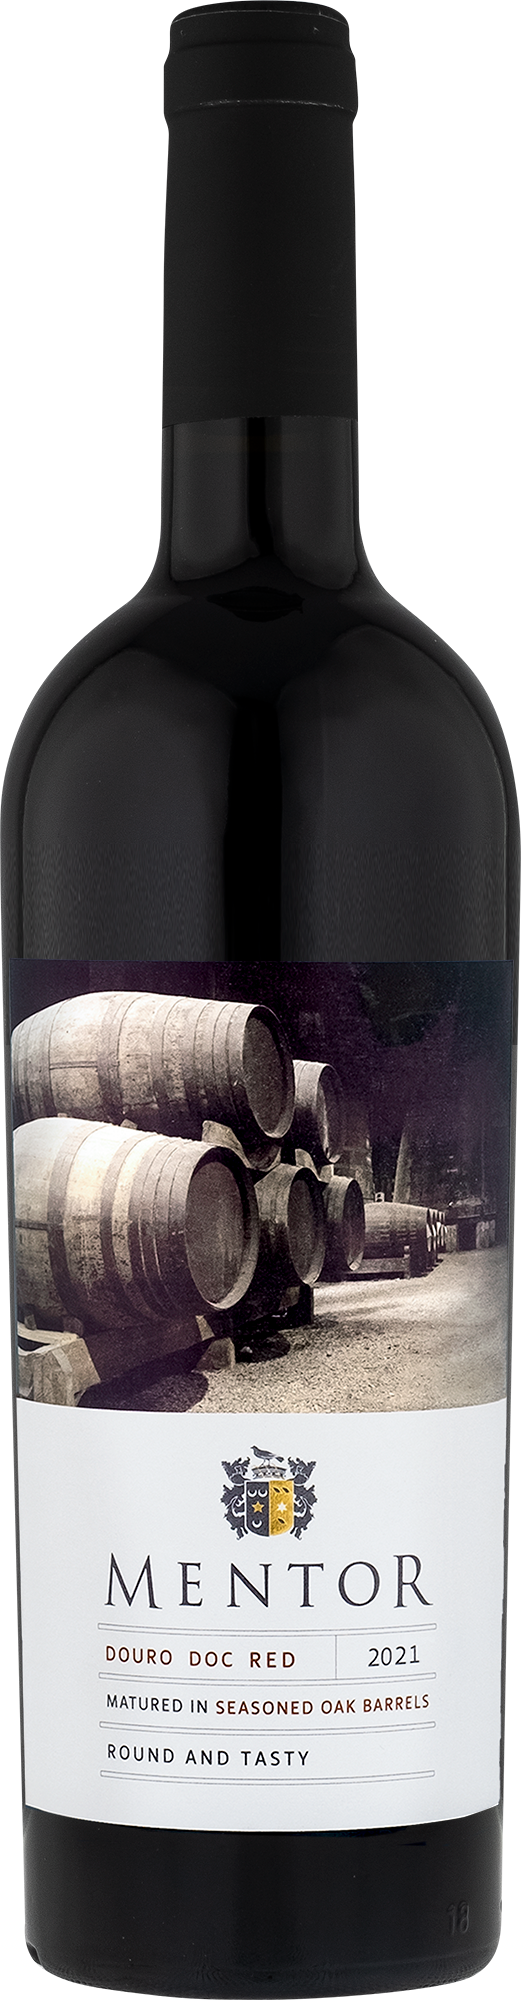 Mentor Douro DOC 2021 Finished in Old Portwine Barrels